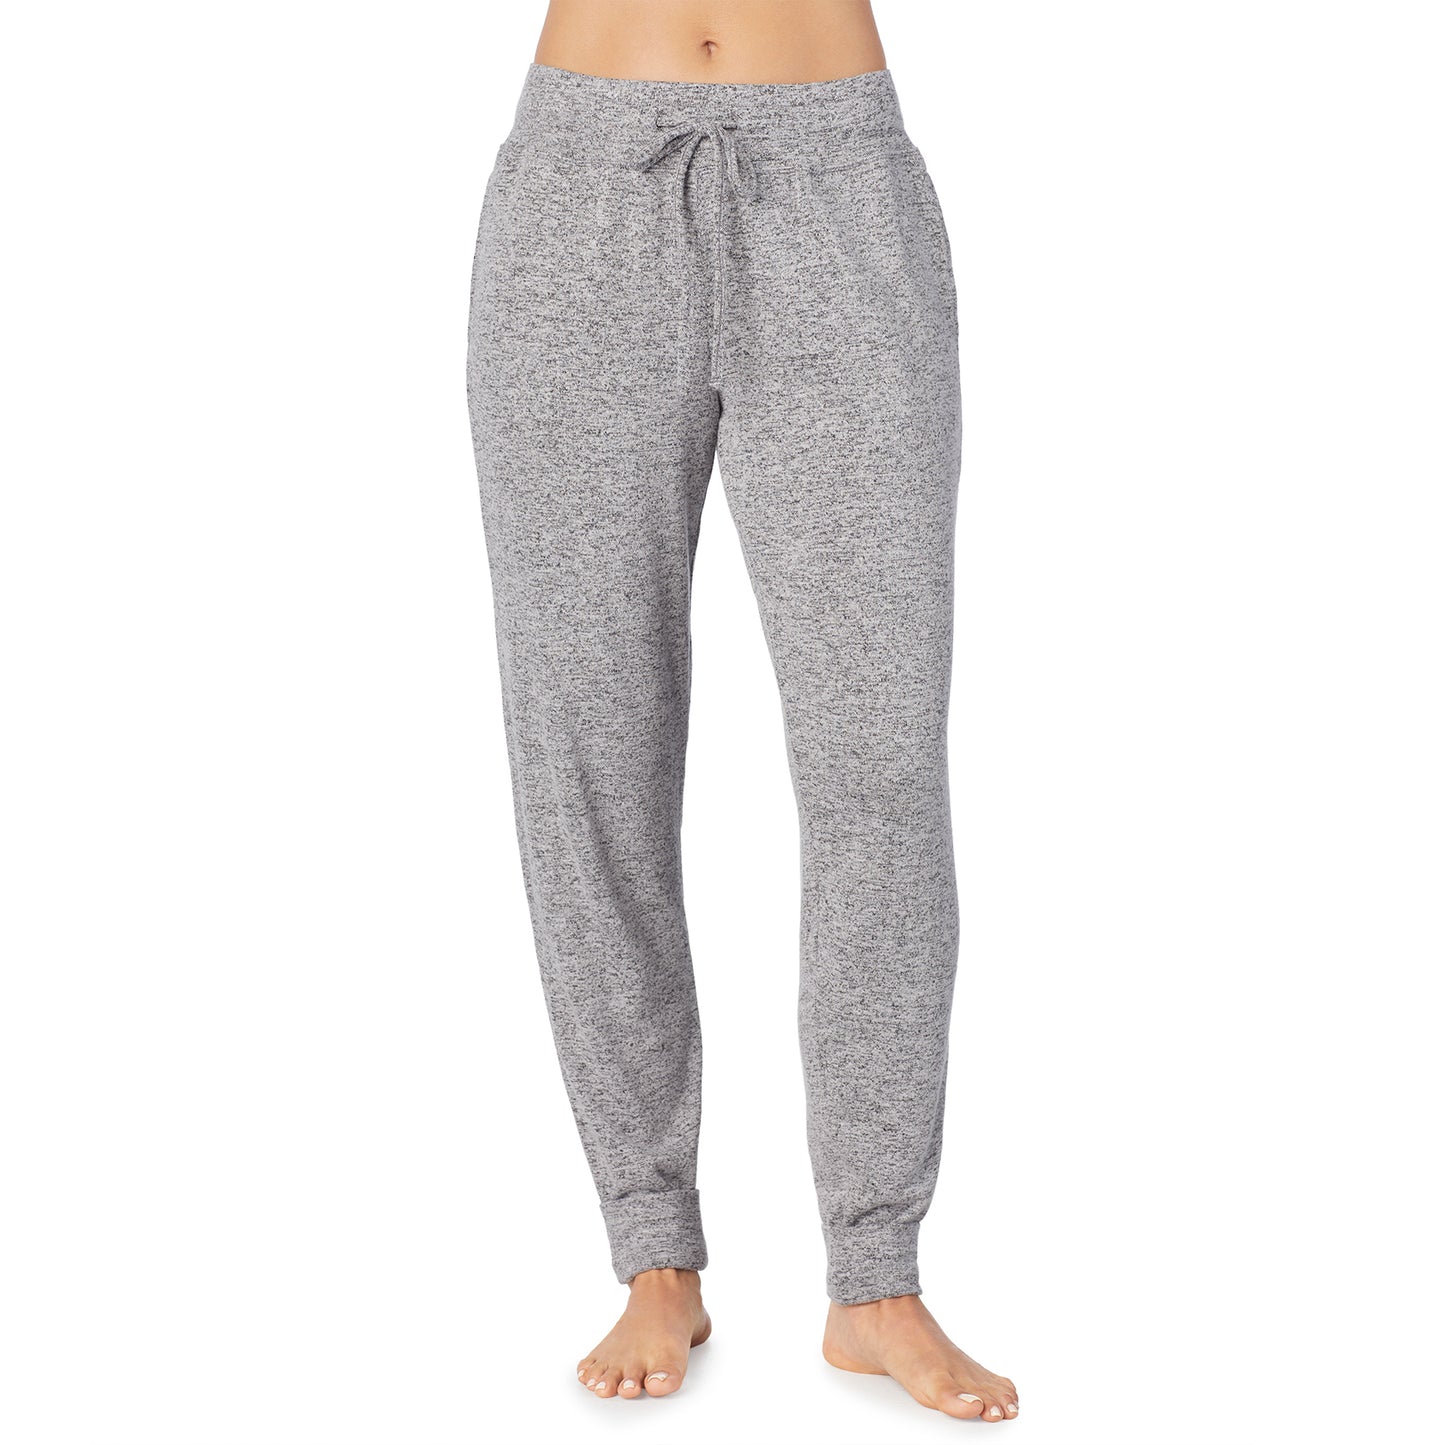 Marled Grey; Model is wearing size S. She is 5’9”, Bust 32”, Waist 25.5”, Hips 36”.@lower body of a lady wearing marled grey jogger